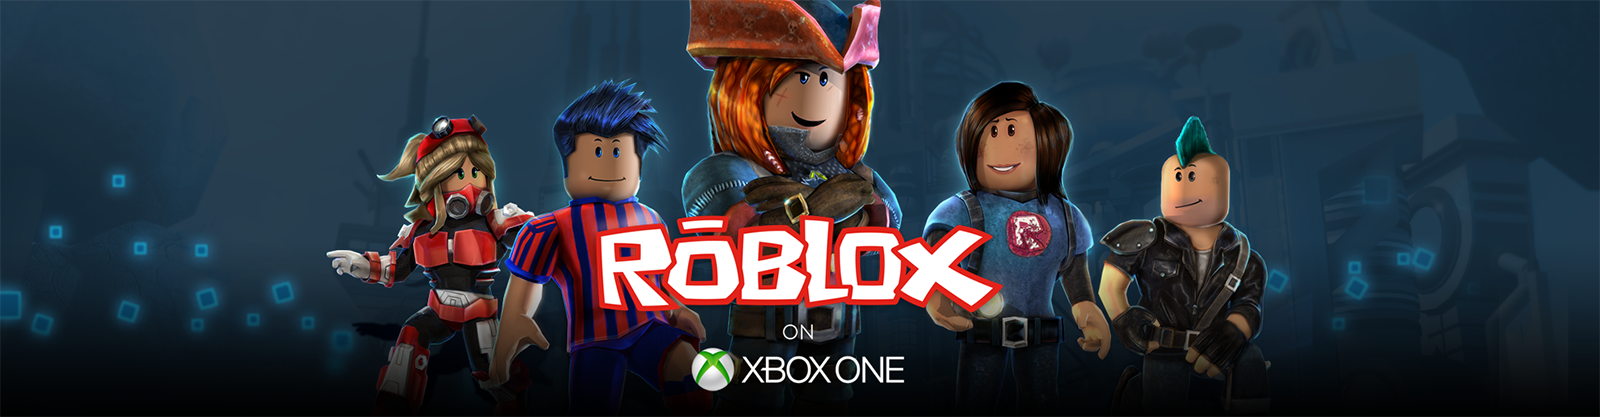 Was Roblox On Xbox 360